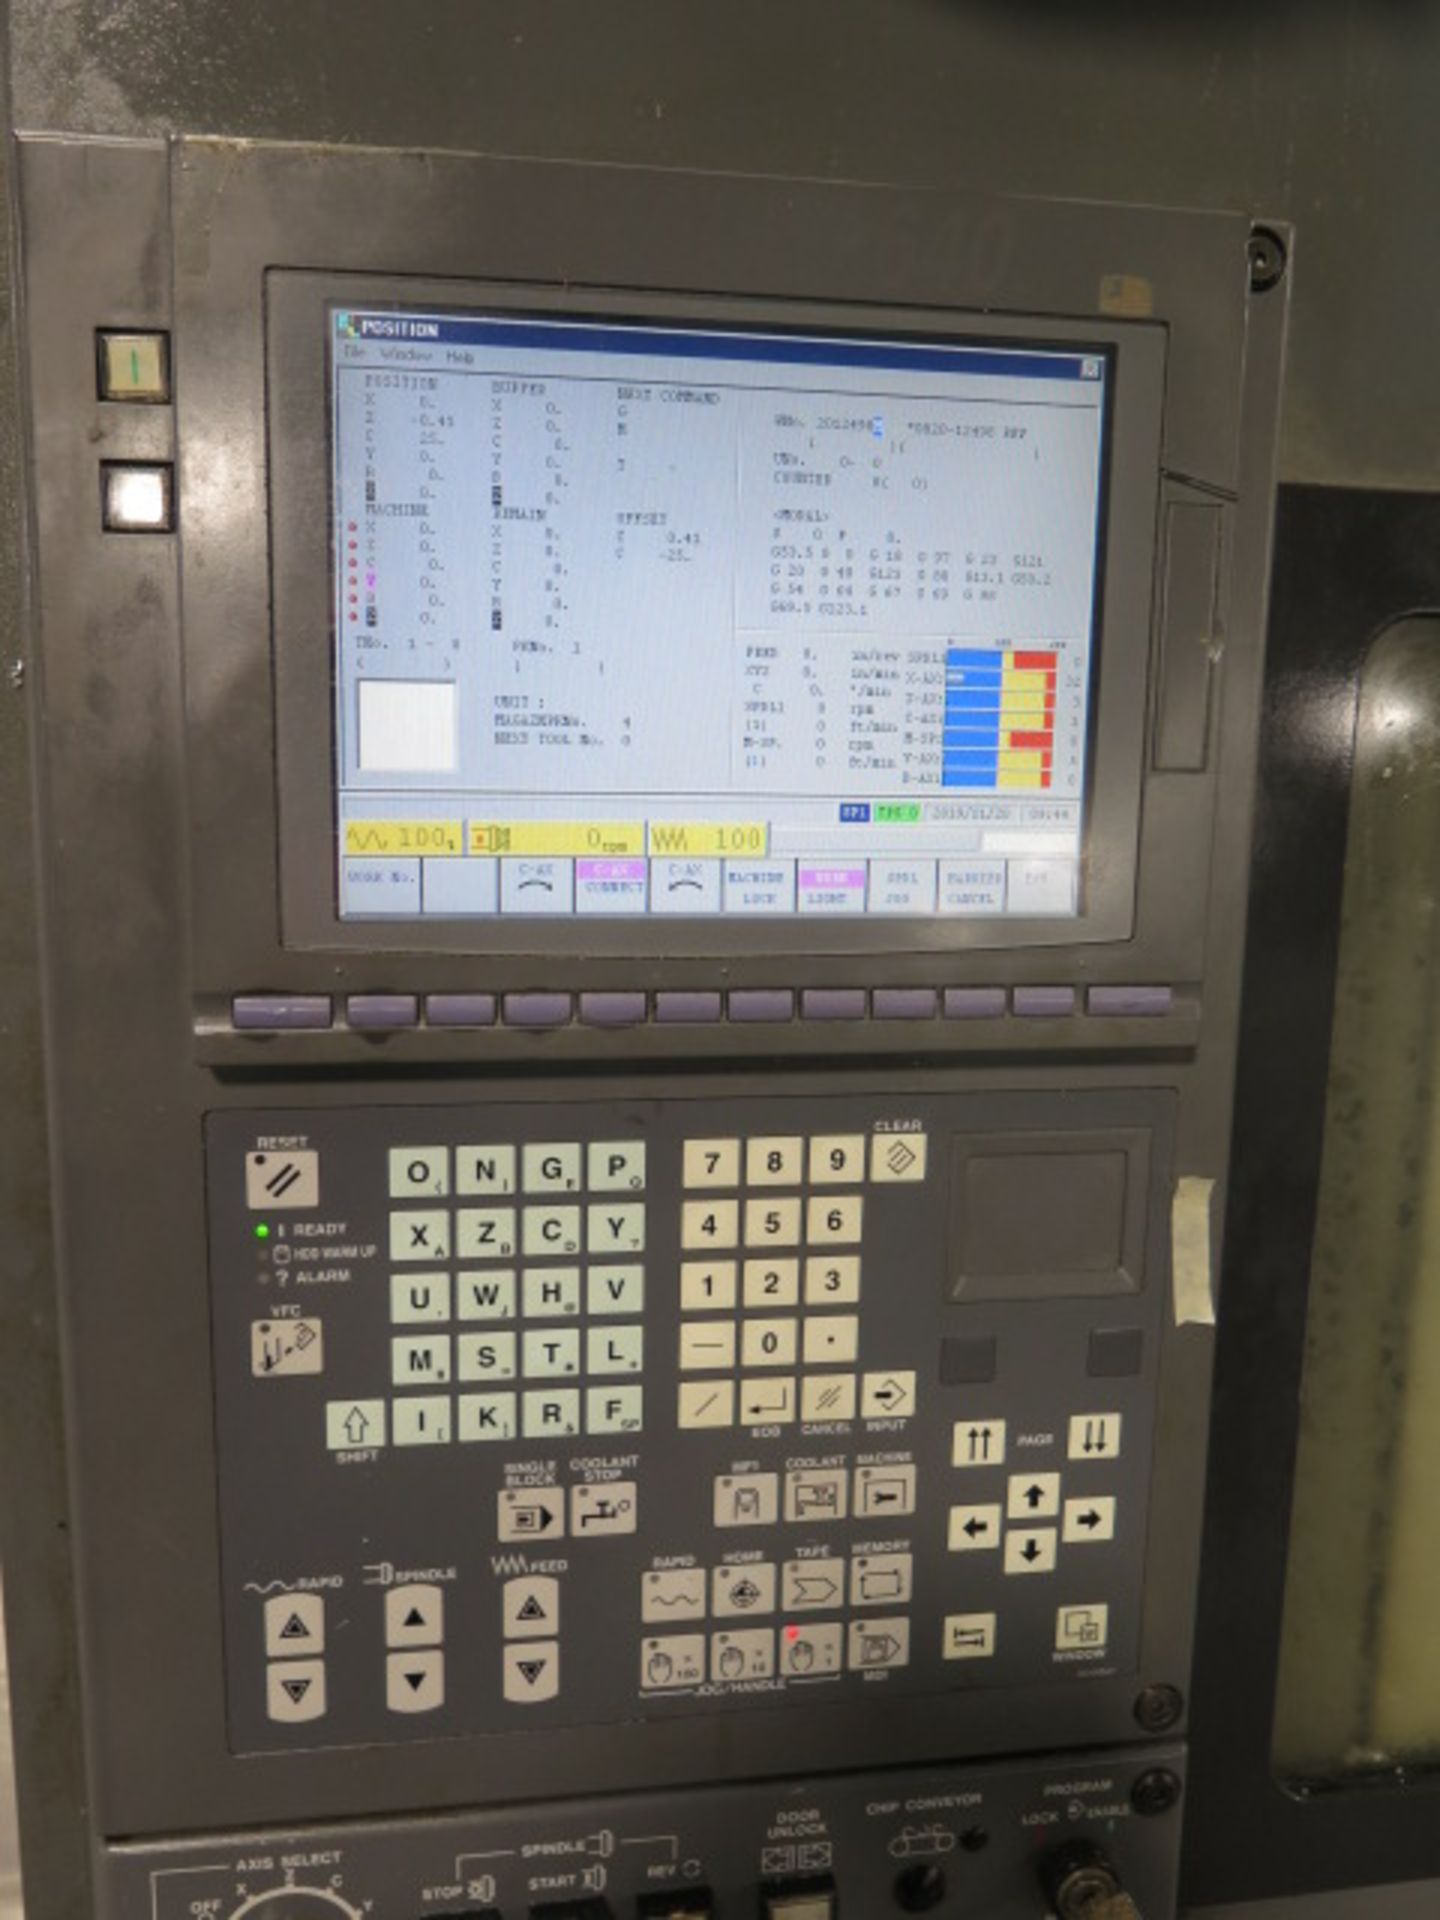 2000 Mazak Integrex 300SY Twin Spindle, Multi-Axis CNC Turning/Milling Center s/n 151650 w/ Mazatro - Image 7 of 18